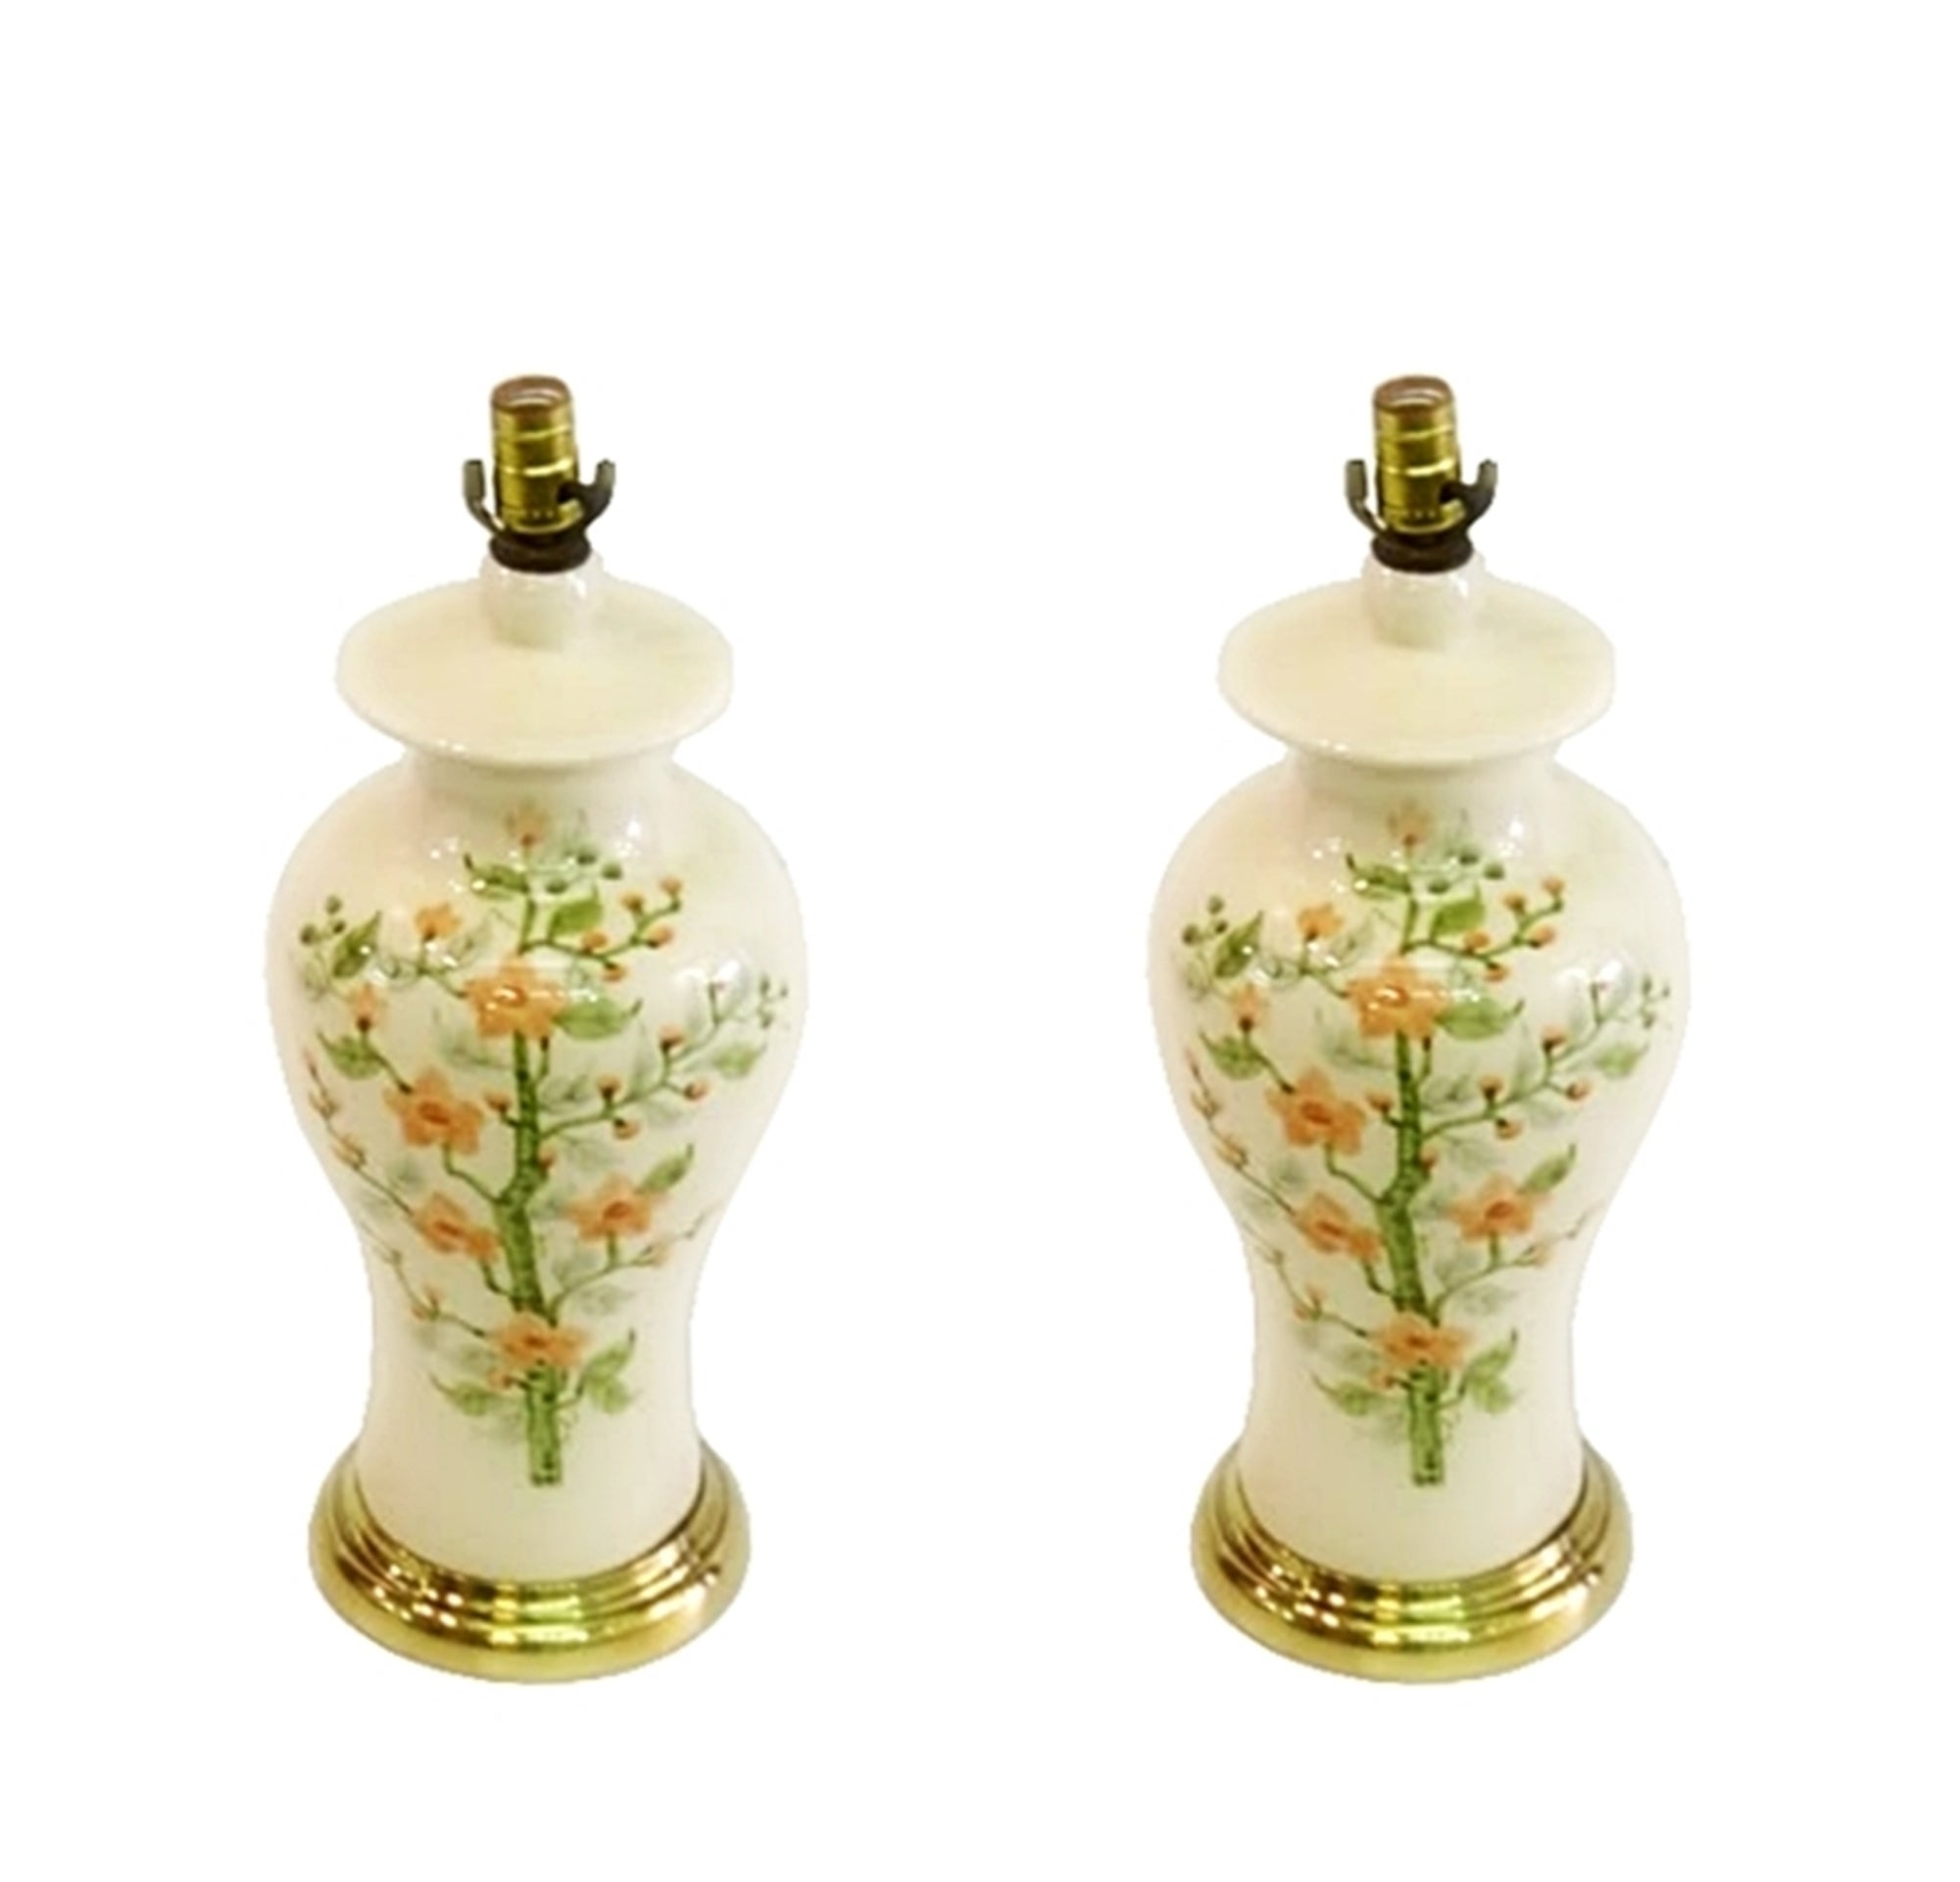 Pair of Porcelain and Brass Lamps with Floral Motif by Eddy Chulick